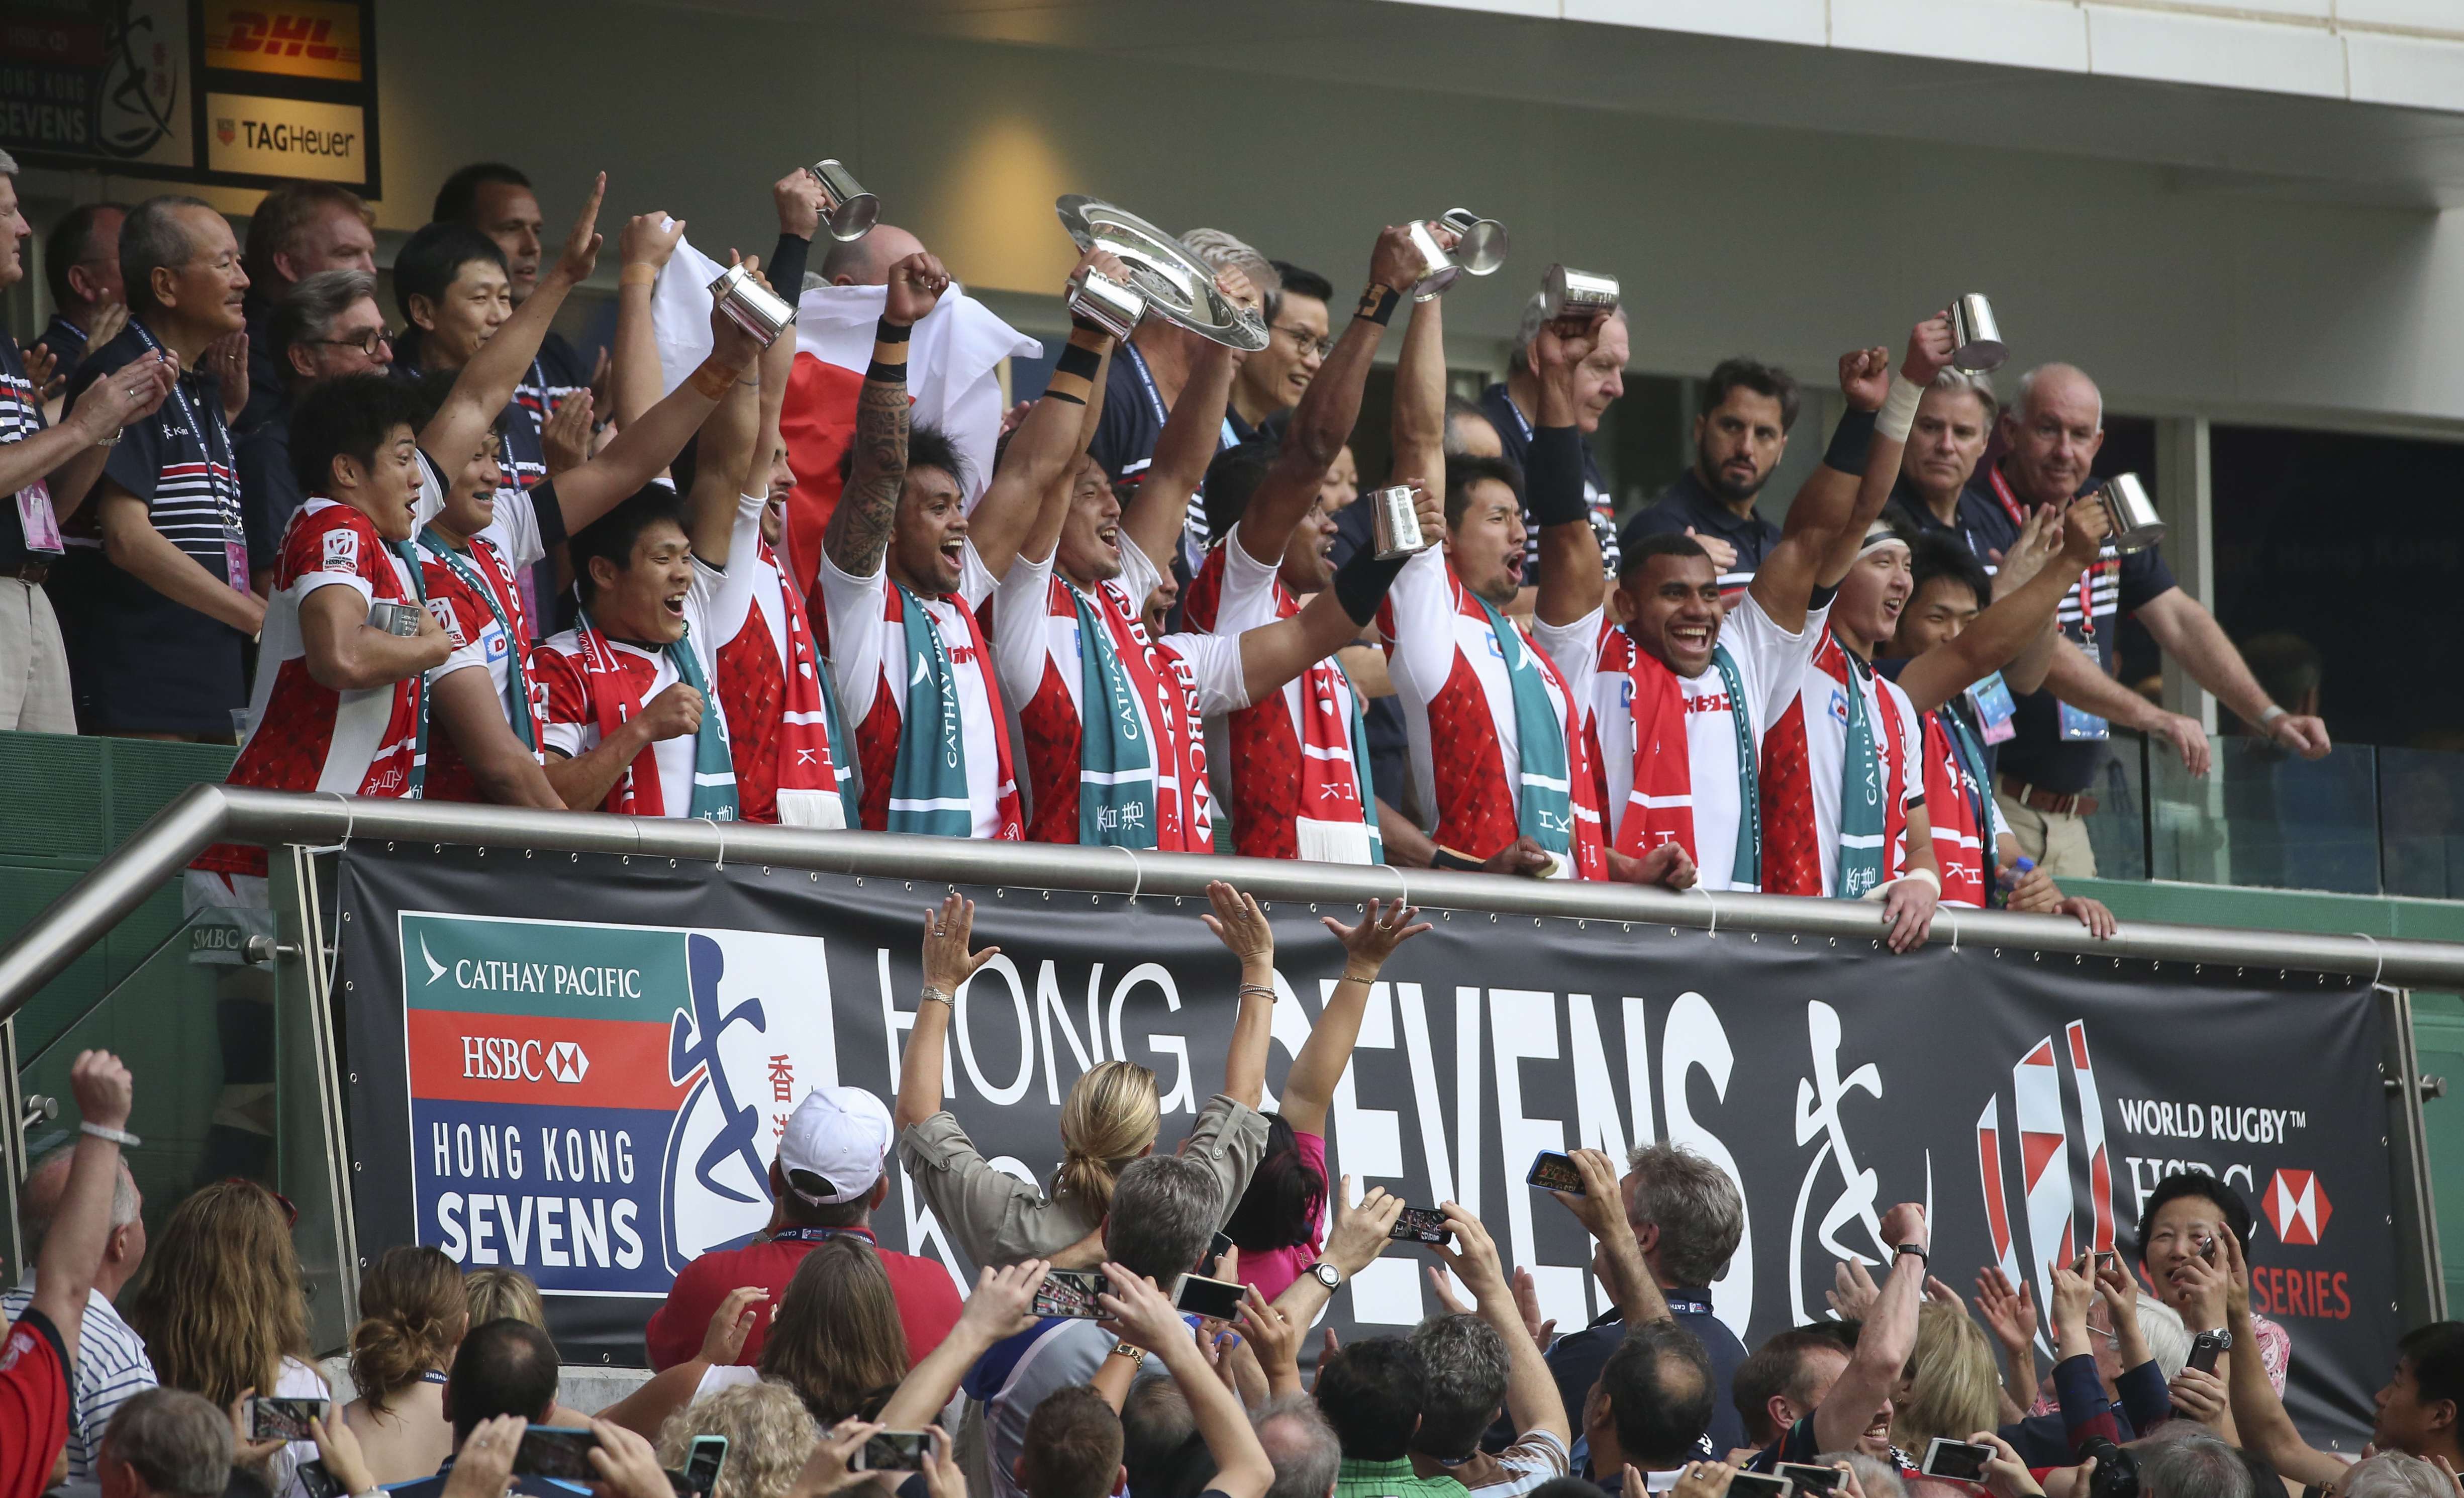 Japan celebrate their victory in the Shield at the 2017 Hong Kong Sevens. Photo: Dickson Lee